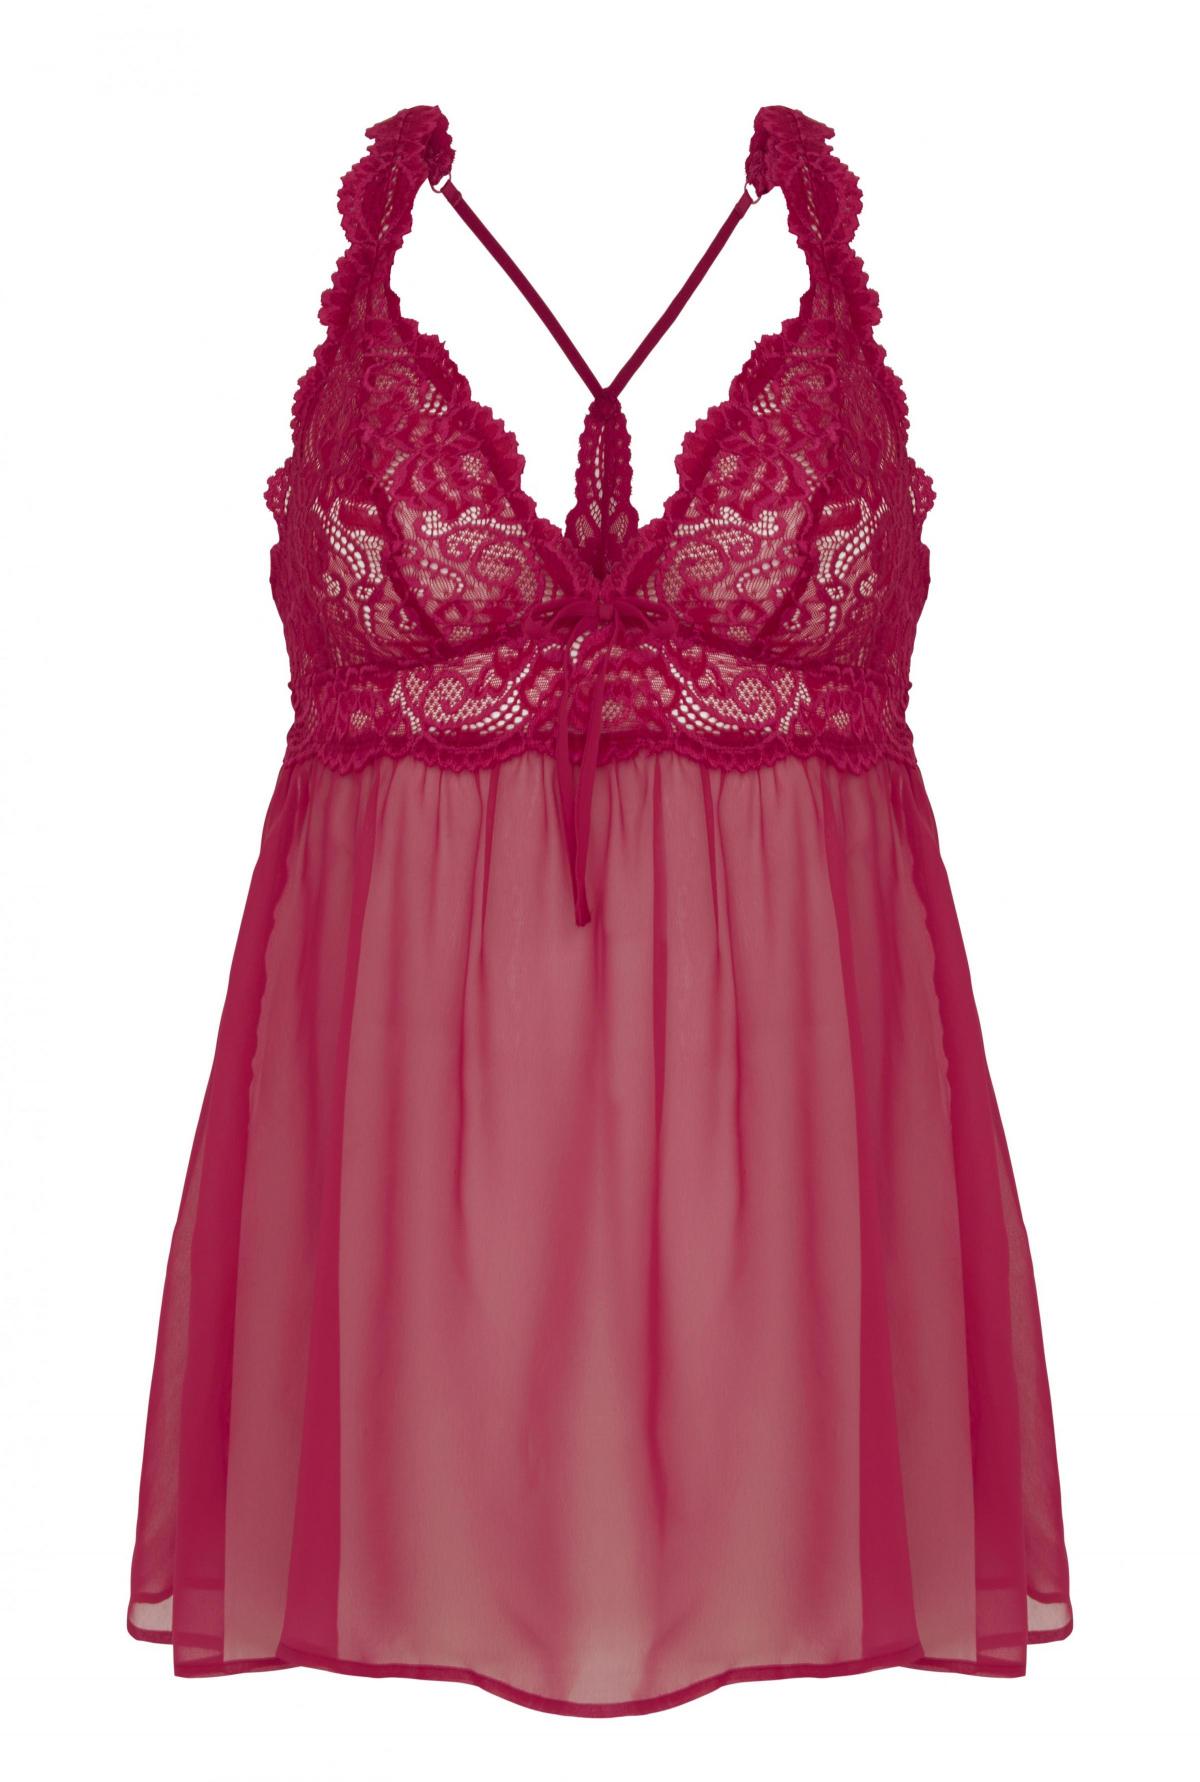 Boux Avenue, Verity Thrill Chemise & Thong, £38